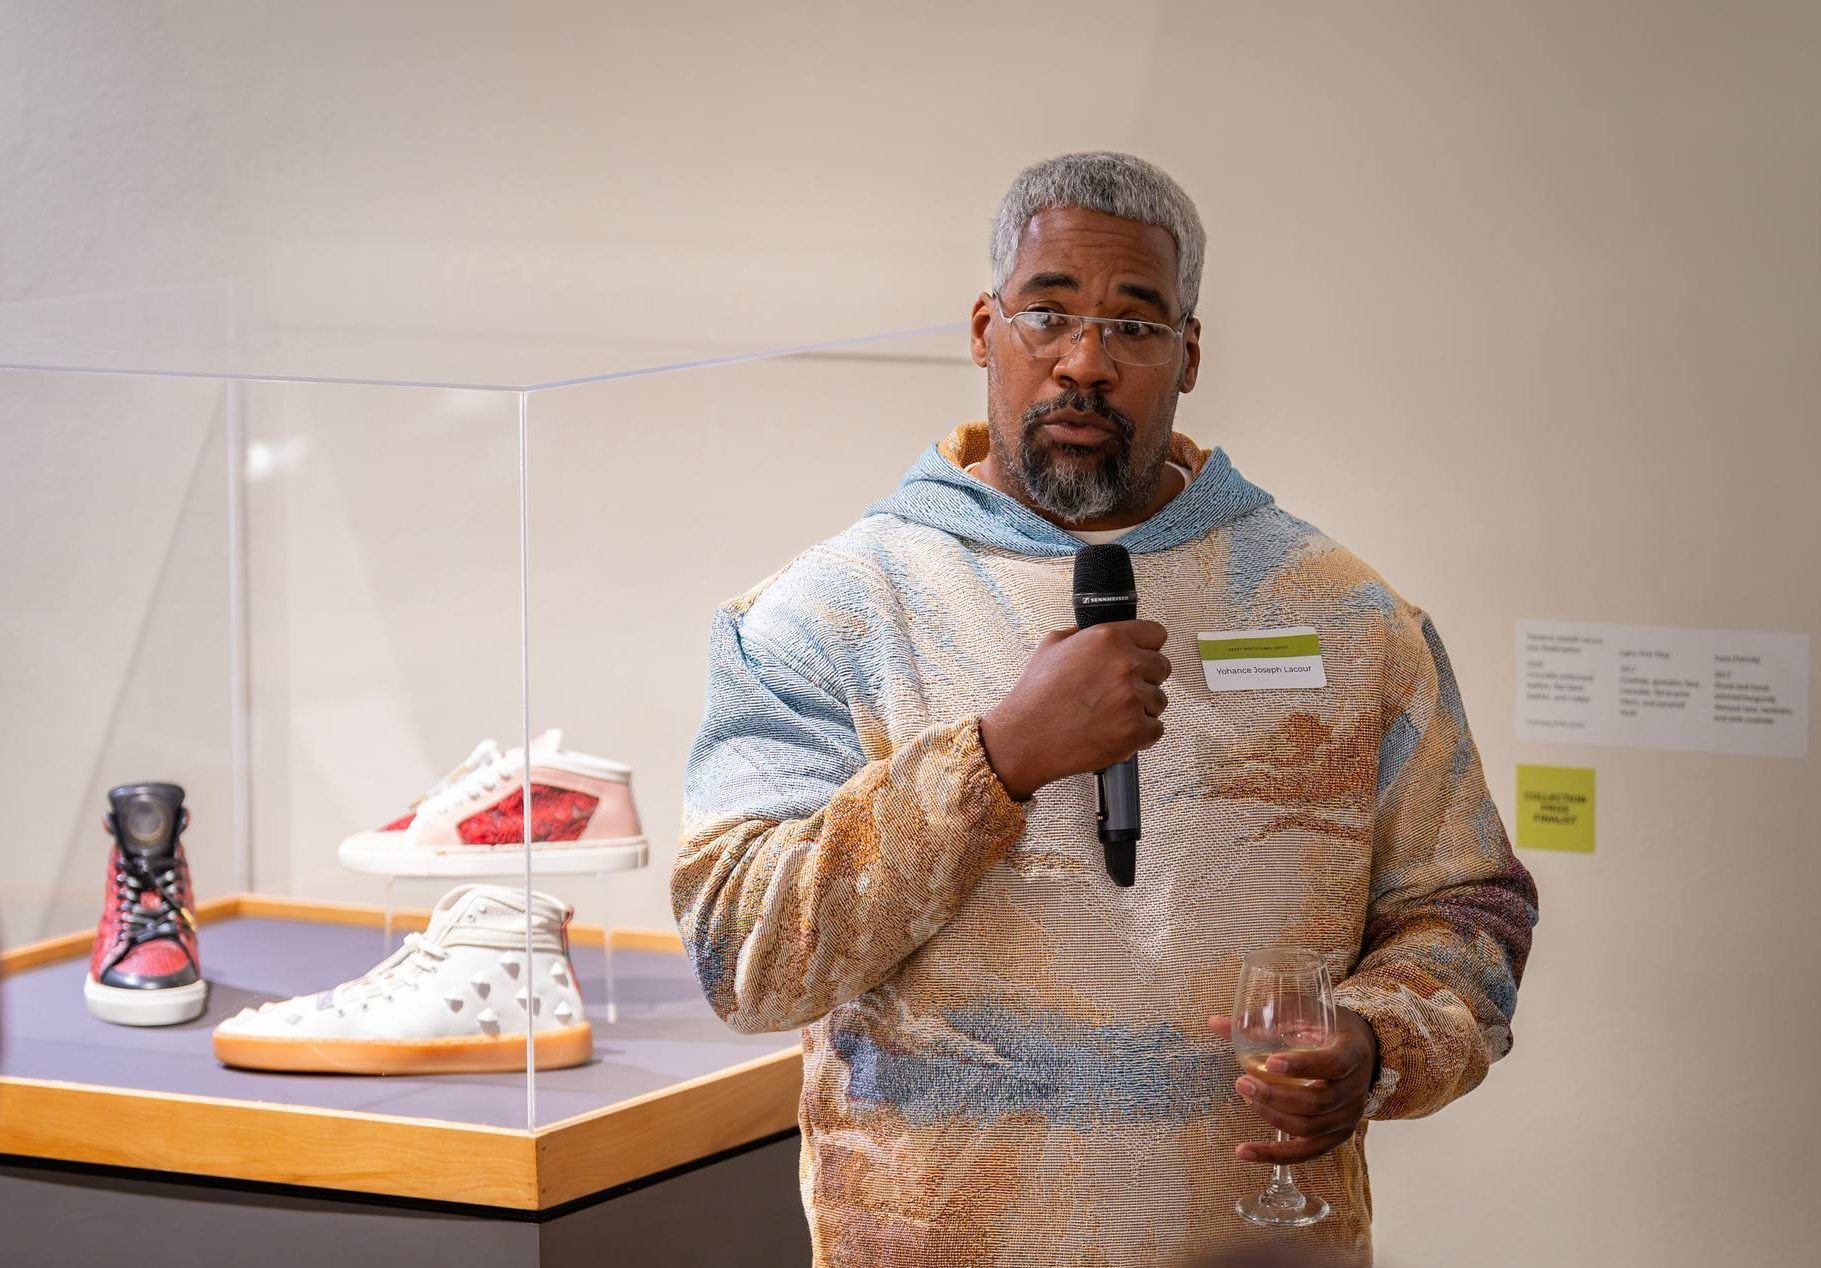 Yohance Lacour speaks in in the exhibition gallery in front of his work.